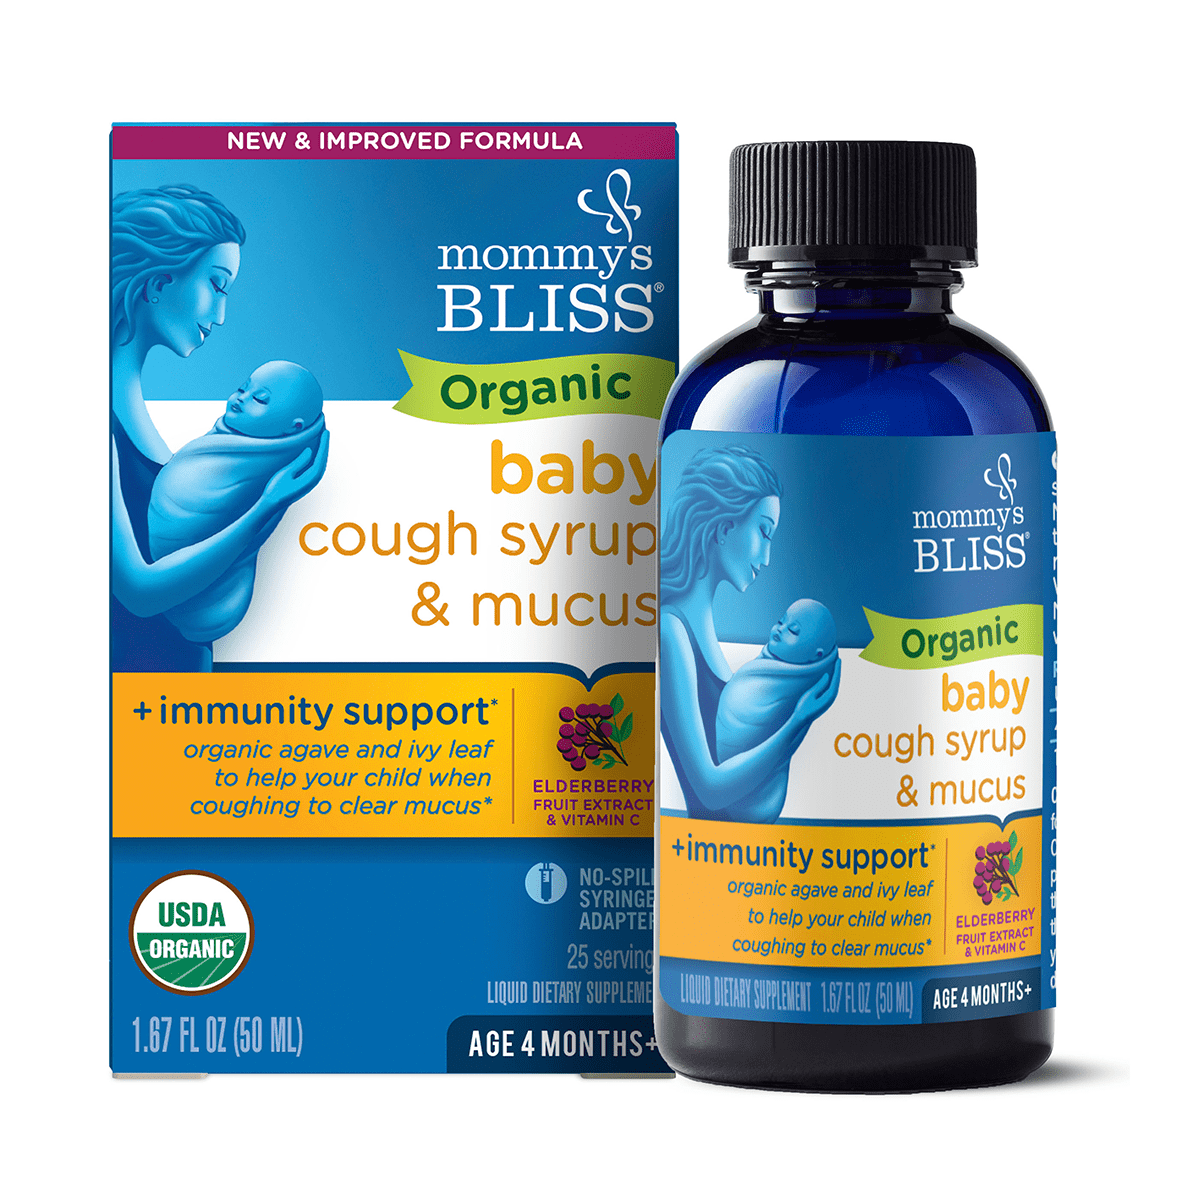 Baby Cough organic box and its bottle in a white background